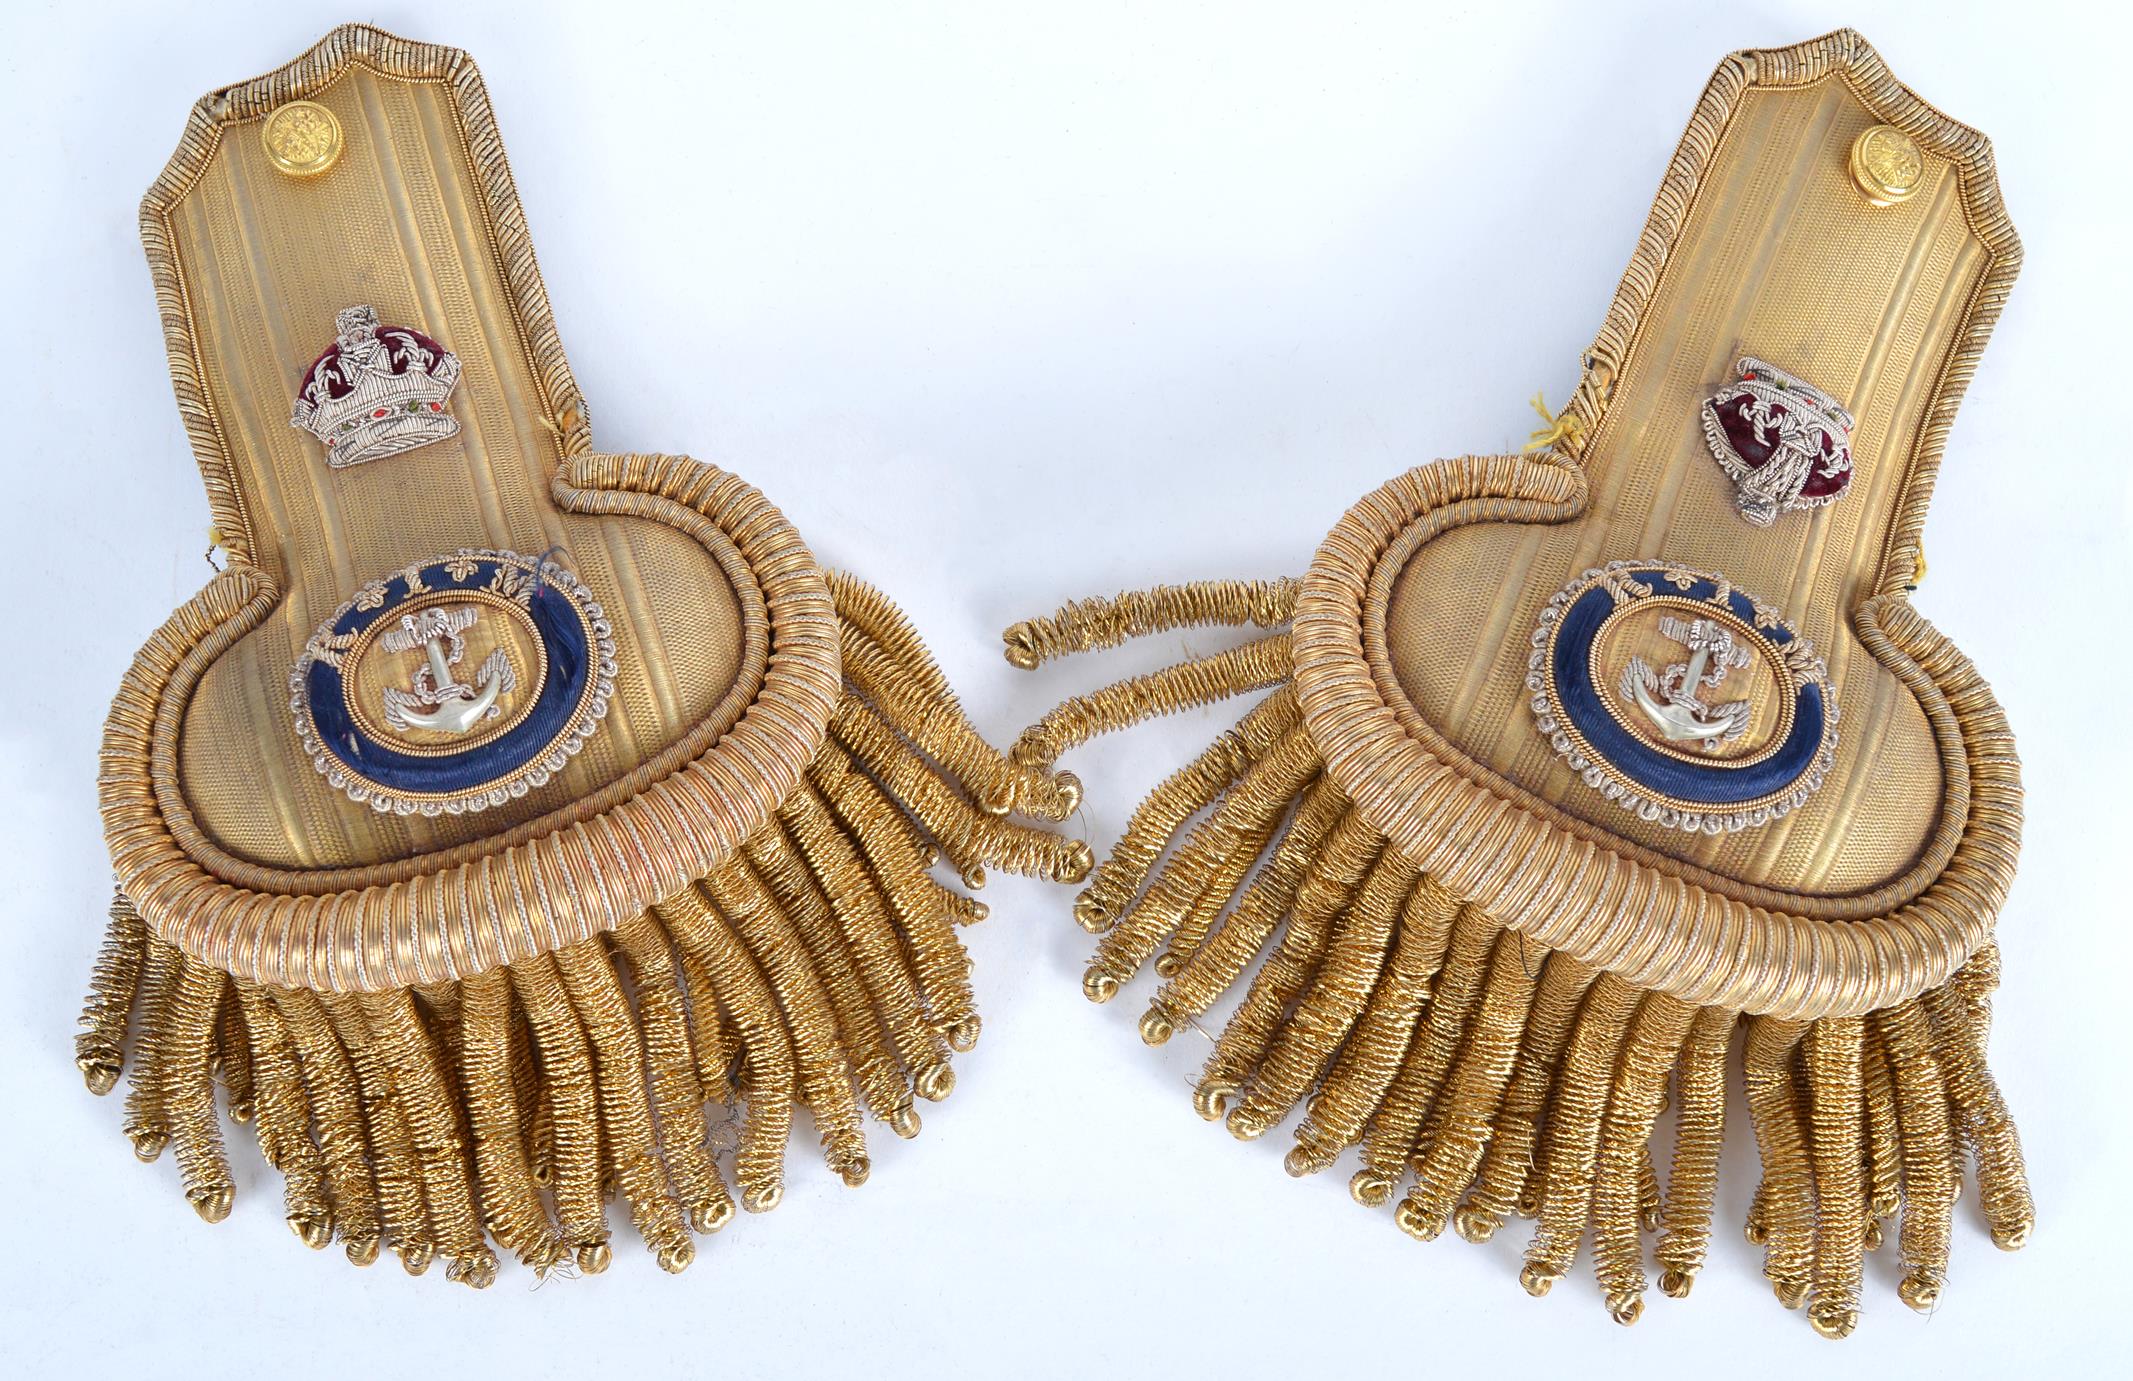 Royal Indian Marine: a pair of officer's epaulettes, each with a crown, and with a fouled anchor - Image 2 of 2